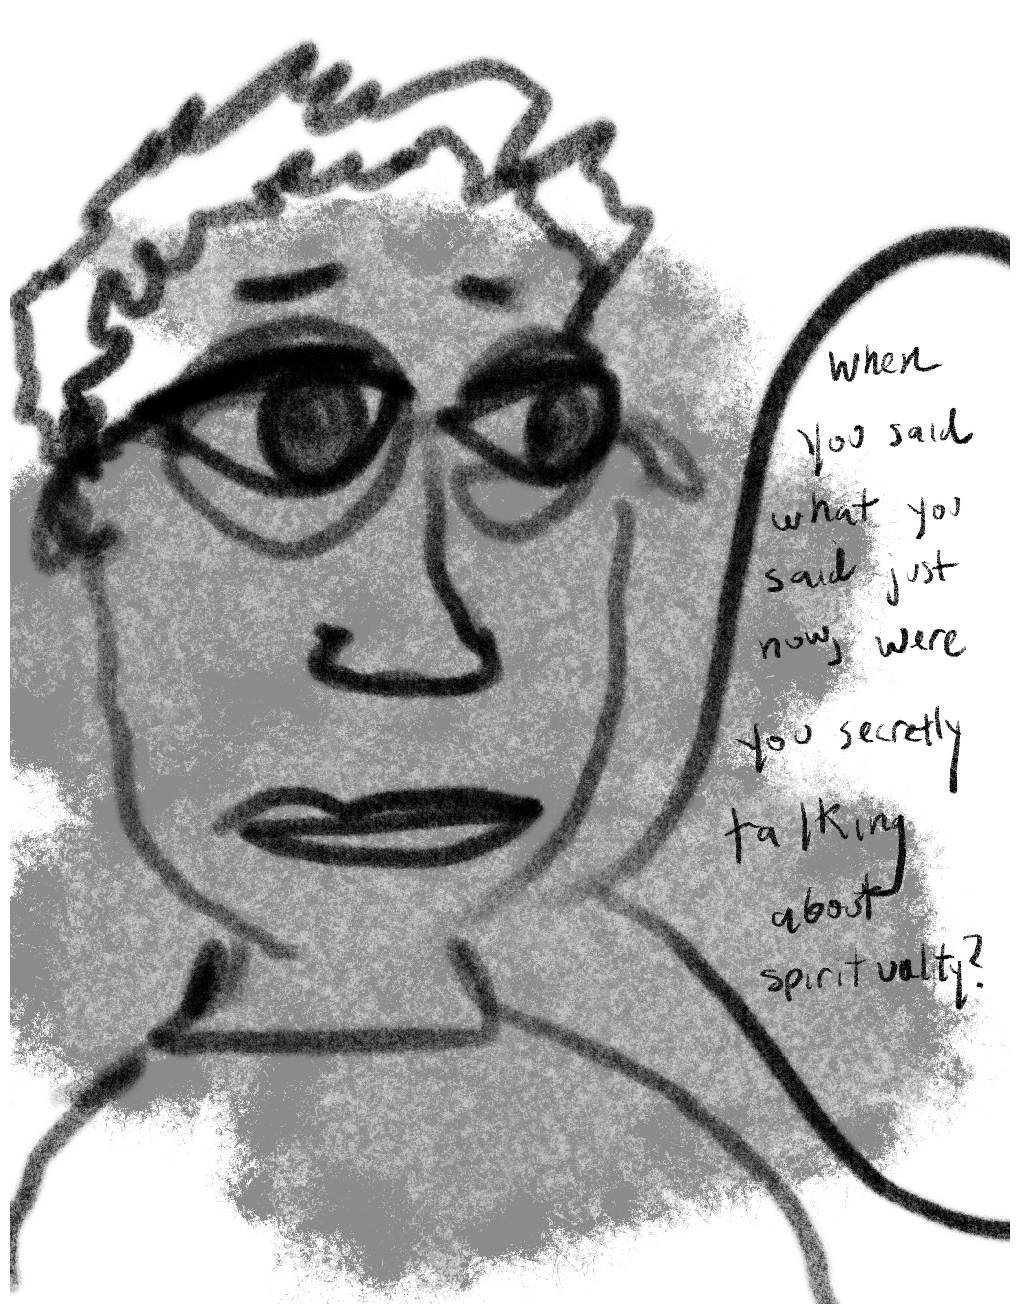 Panel two of a four-panel comic called 'A glimpse of reality', consisting of black line drawing, colour paint effects on a grey and white background. The crudely drawn head and shoulders of a young man fill most of the panel. He has large eyes, glasses and short uneven hair. He looks into the distance with a sad expression. A speech bubble coming from the figure says "When you said what you said just now, were you secretly talking about spirituality?"